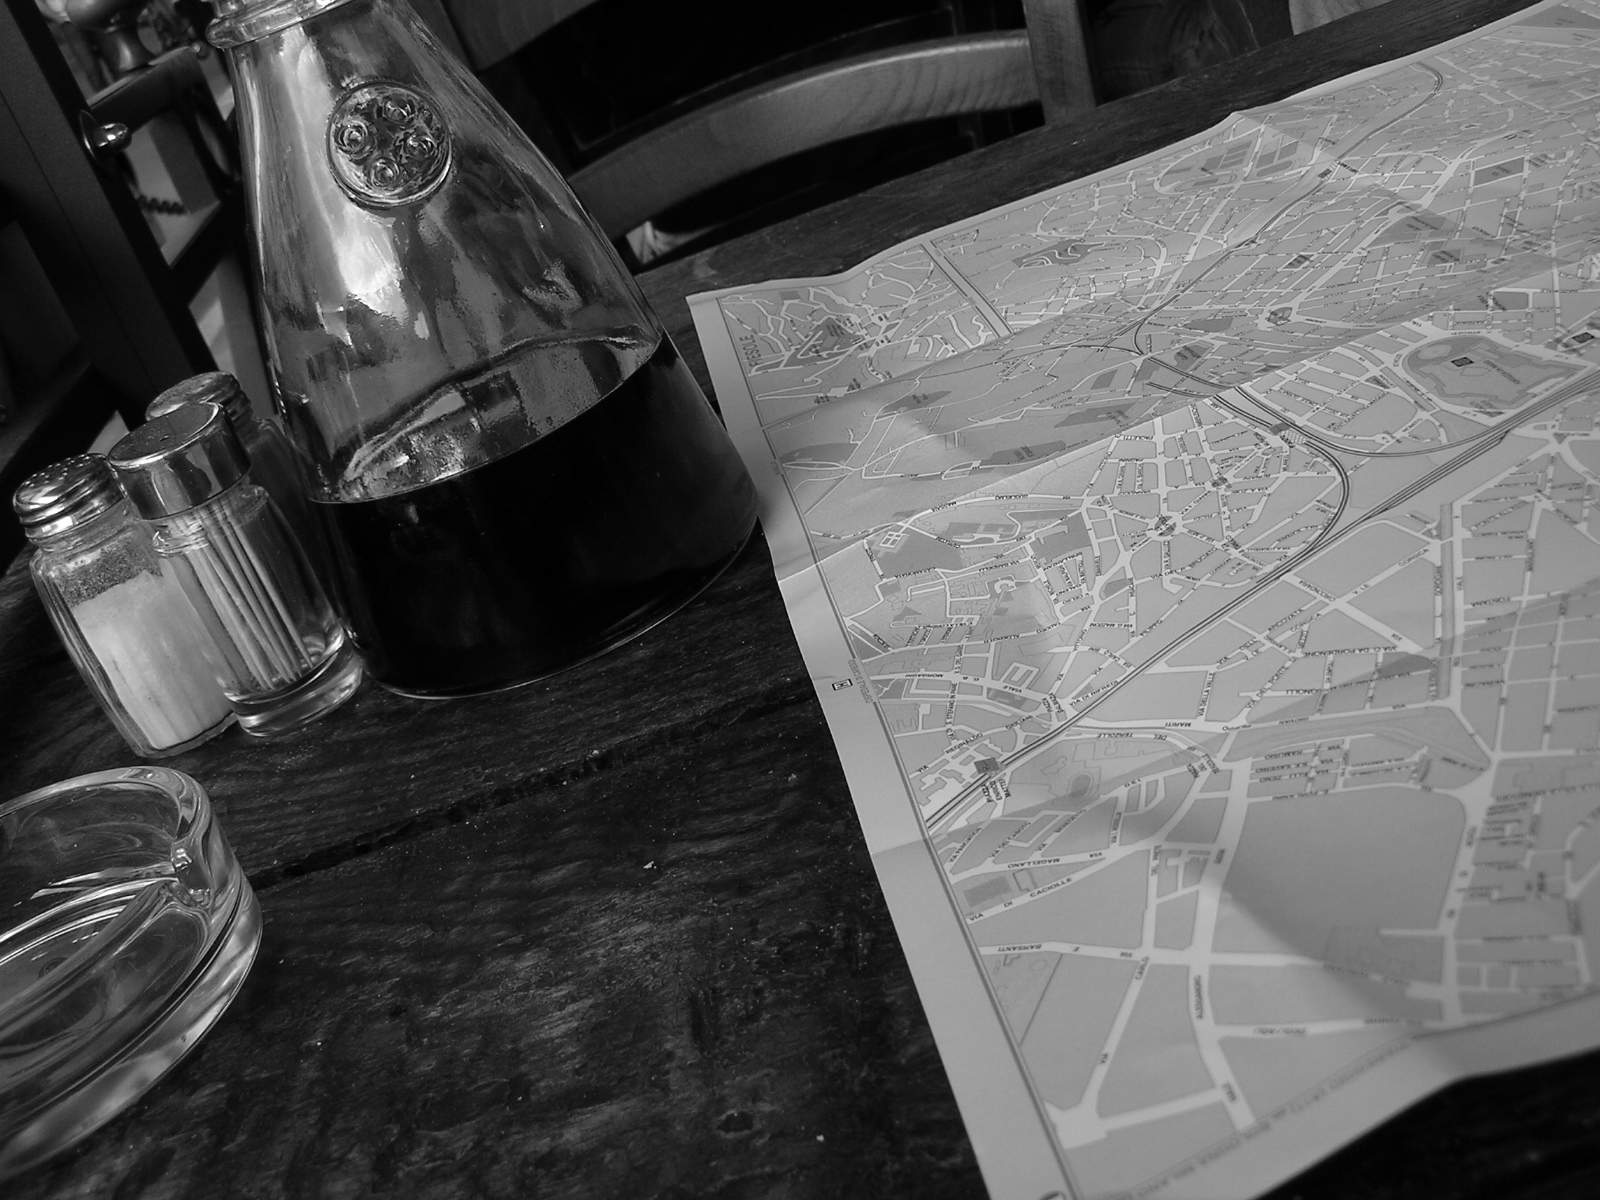 Map and carafe of wine